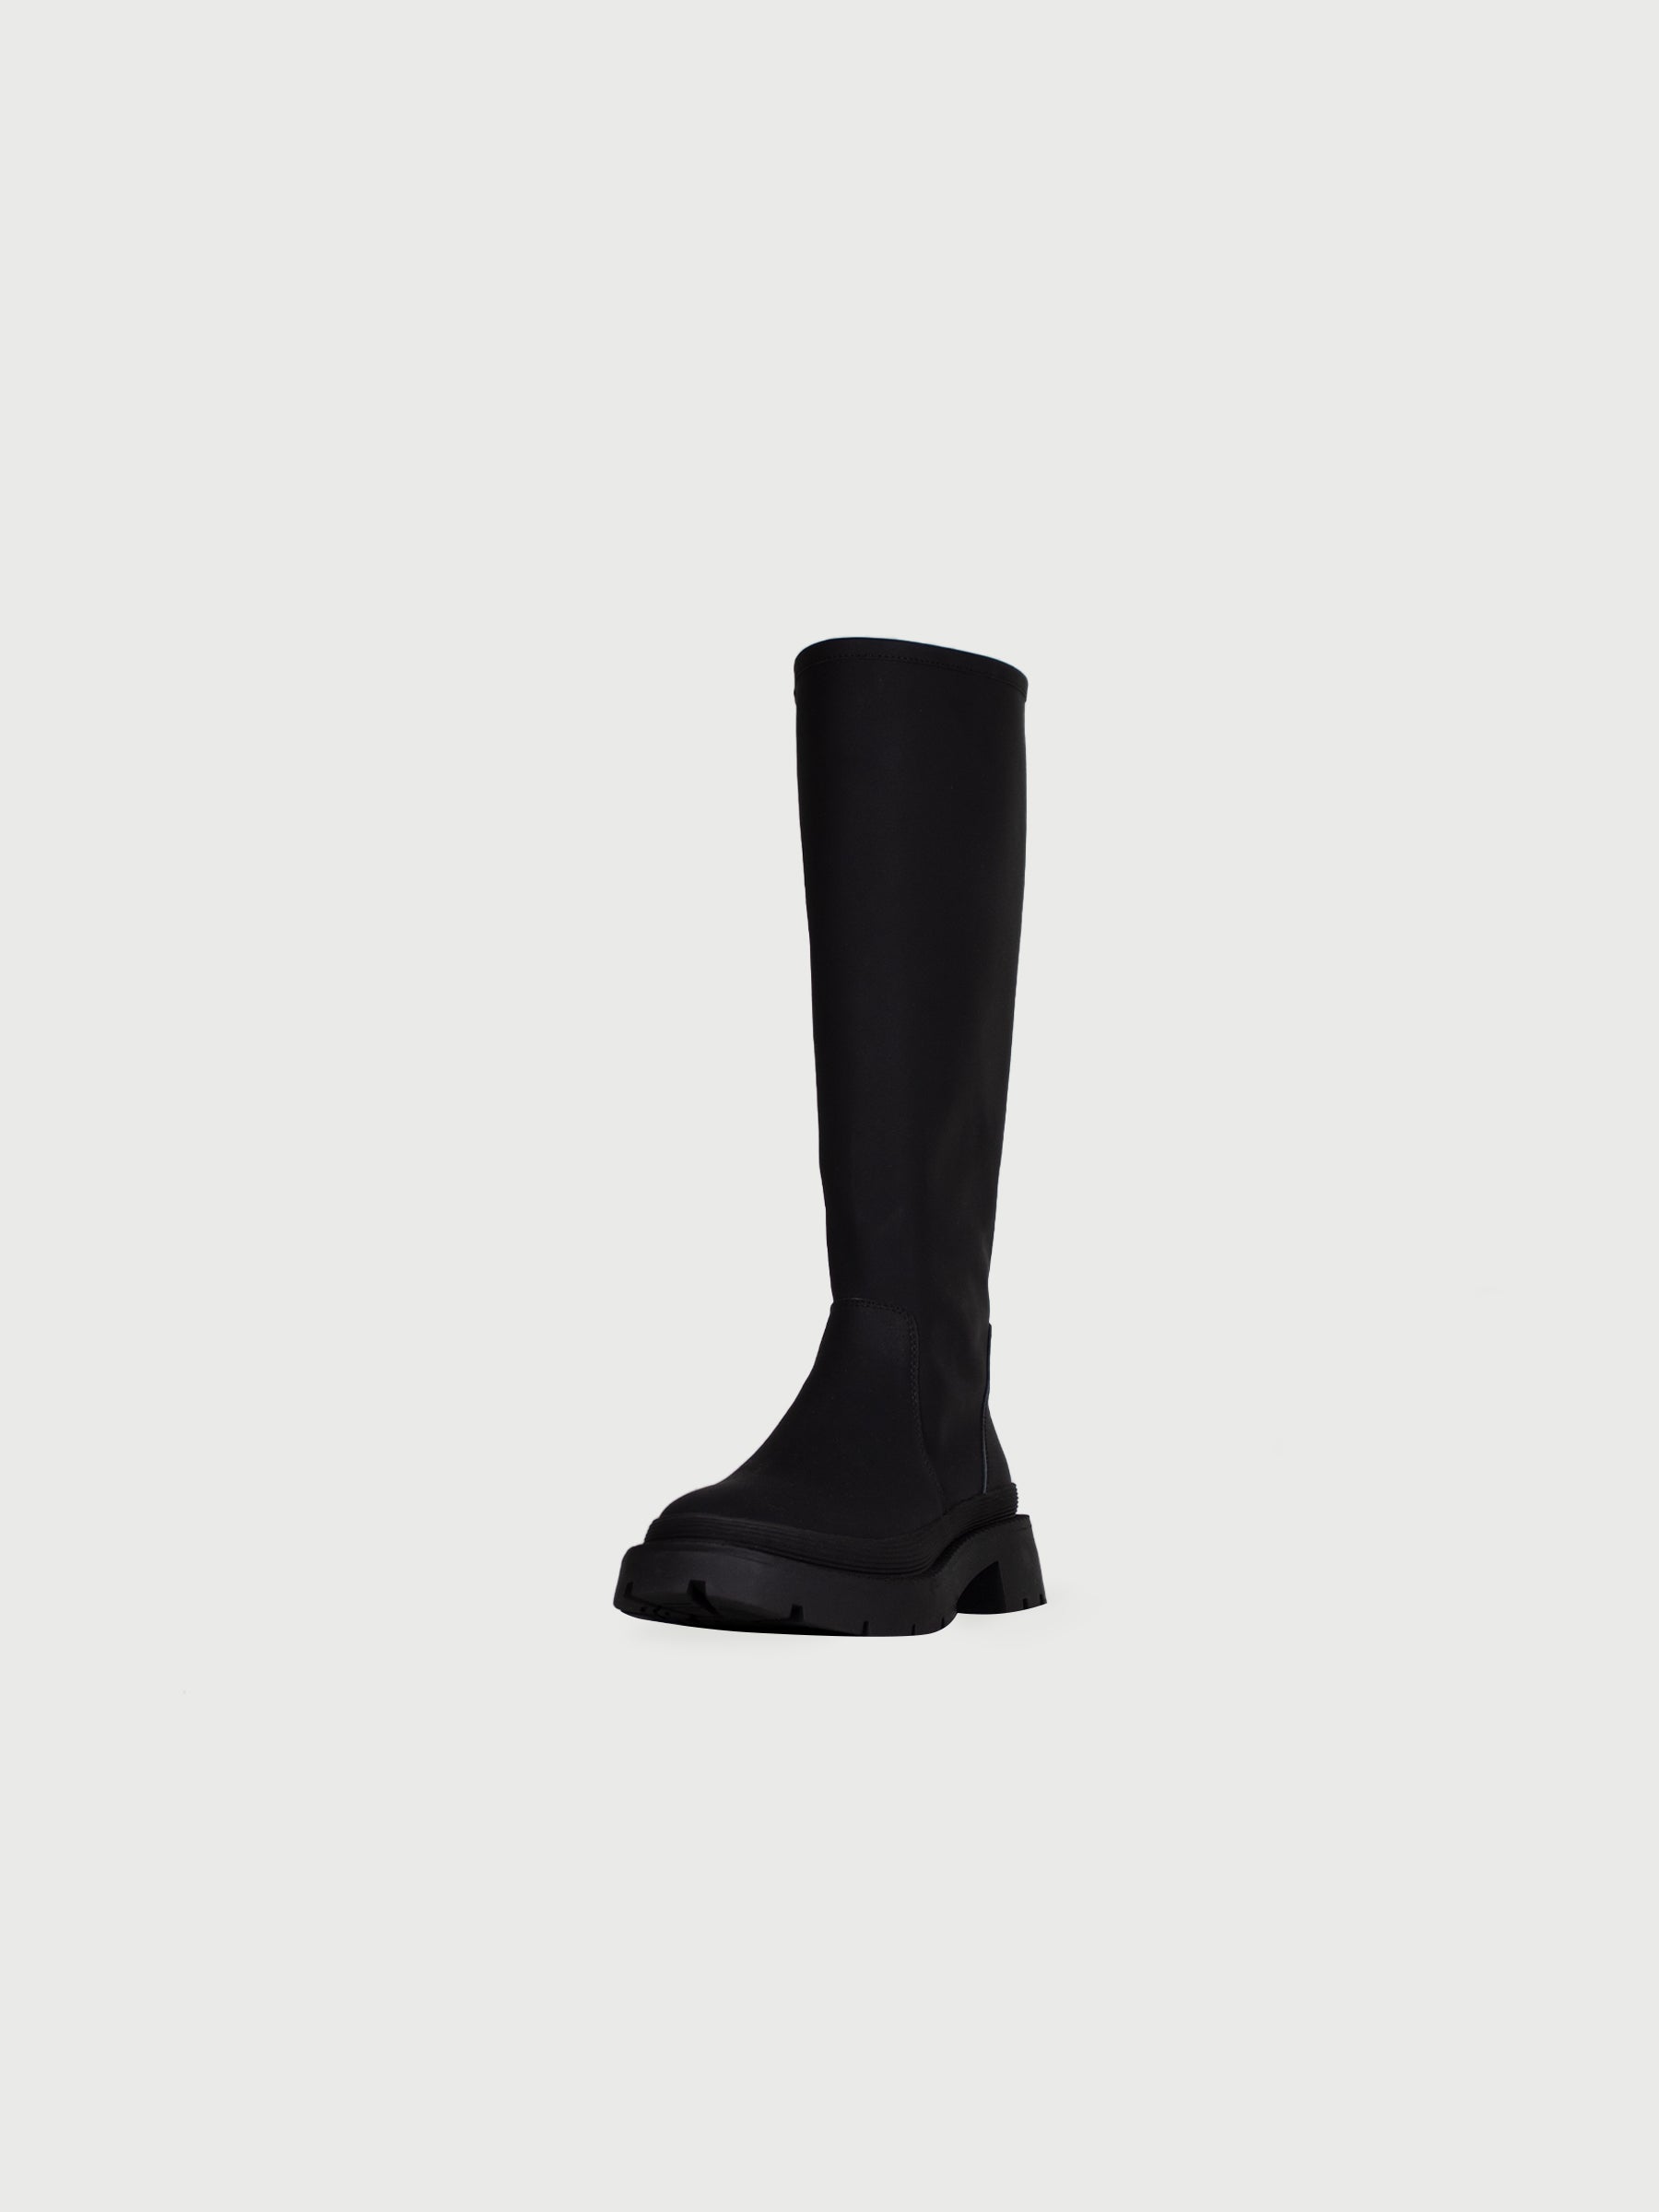 Matte Polish Leather Knee High Boots